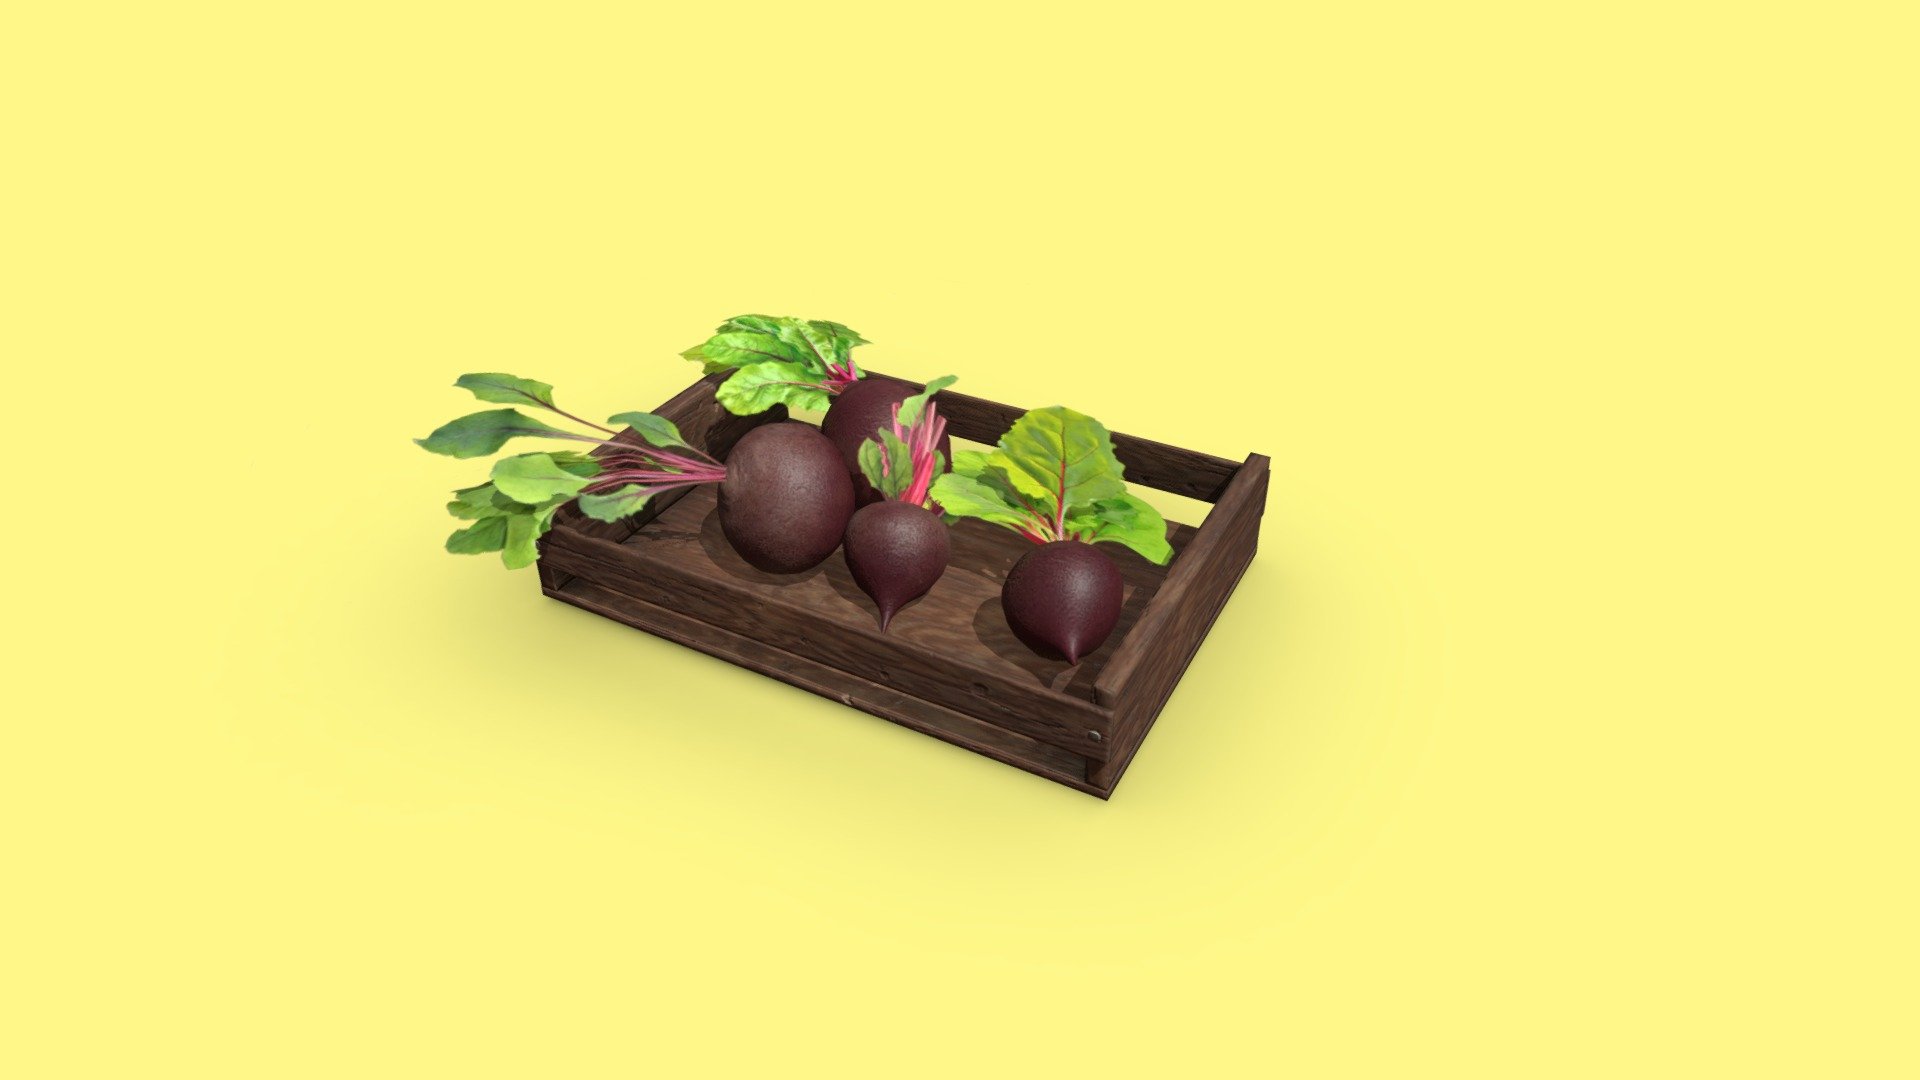 Beetroot Box




1 mesh included.

Model is low poly.

Model is Game-Ready/VR ready.

Model is UV mapped and unwrapped (non overlapping)

Assets are fully textured, 1024x1024 .png’s. PBR

File Format: .FBX

Additional zip file contains all the files 3d model